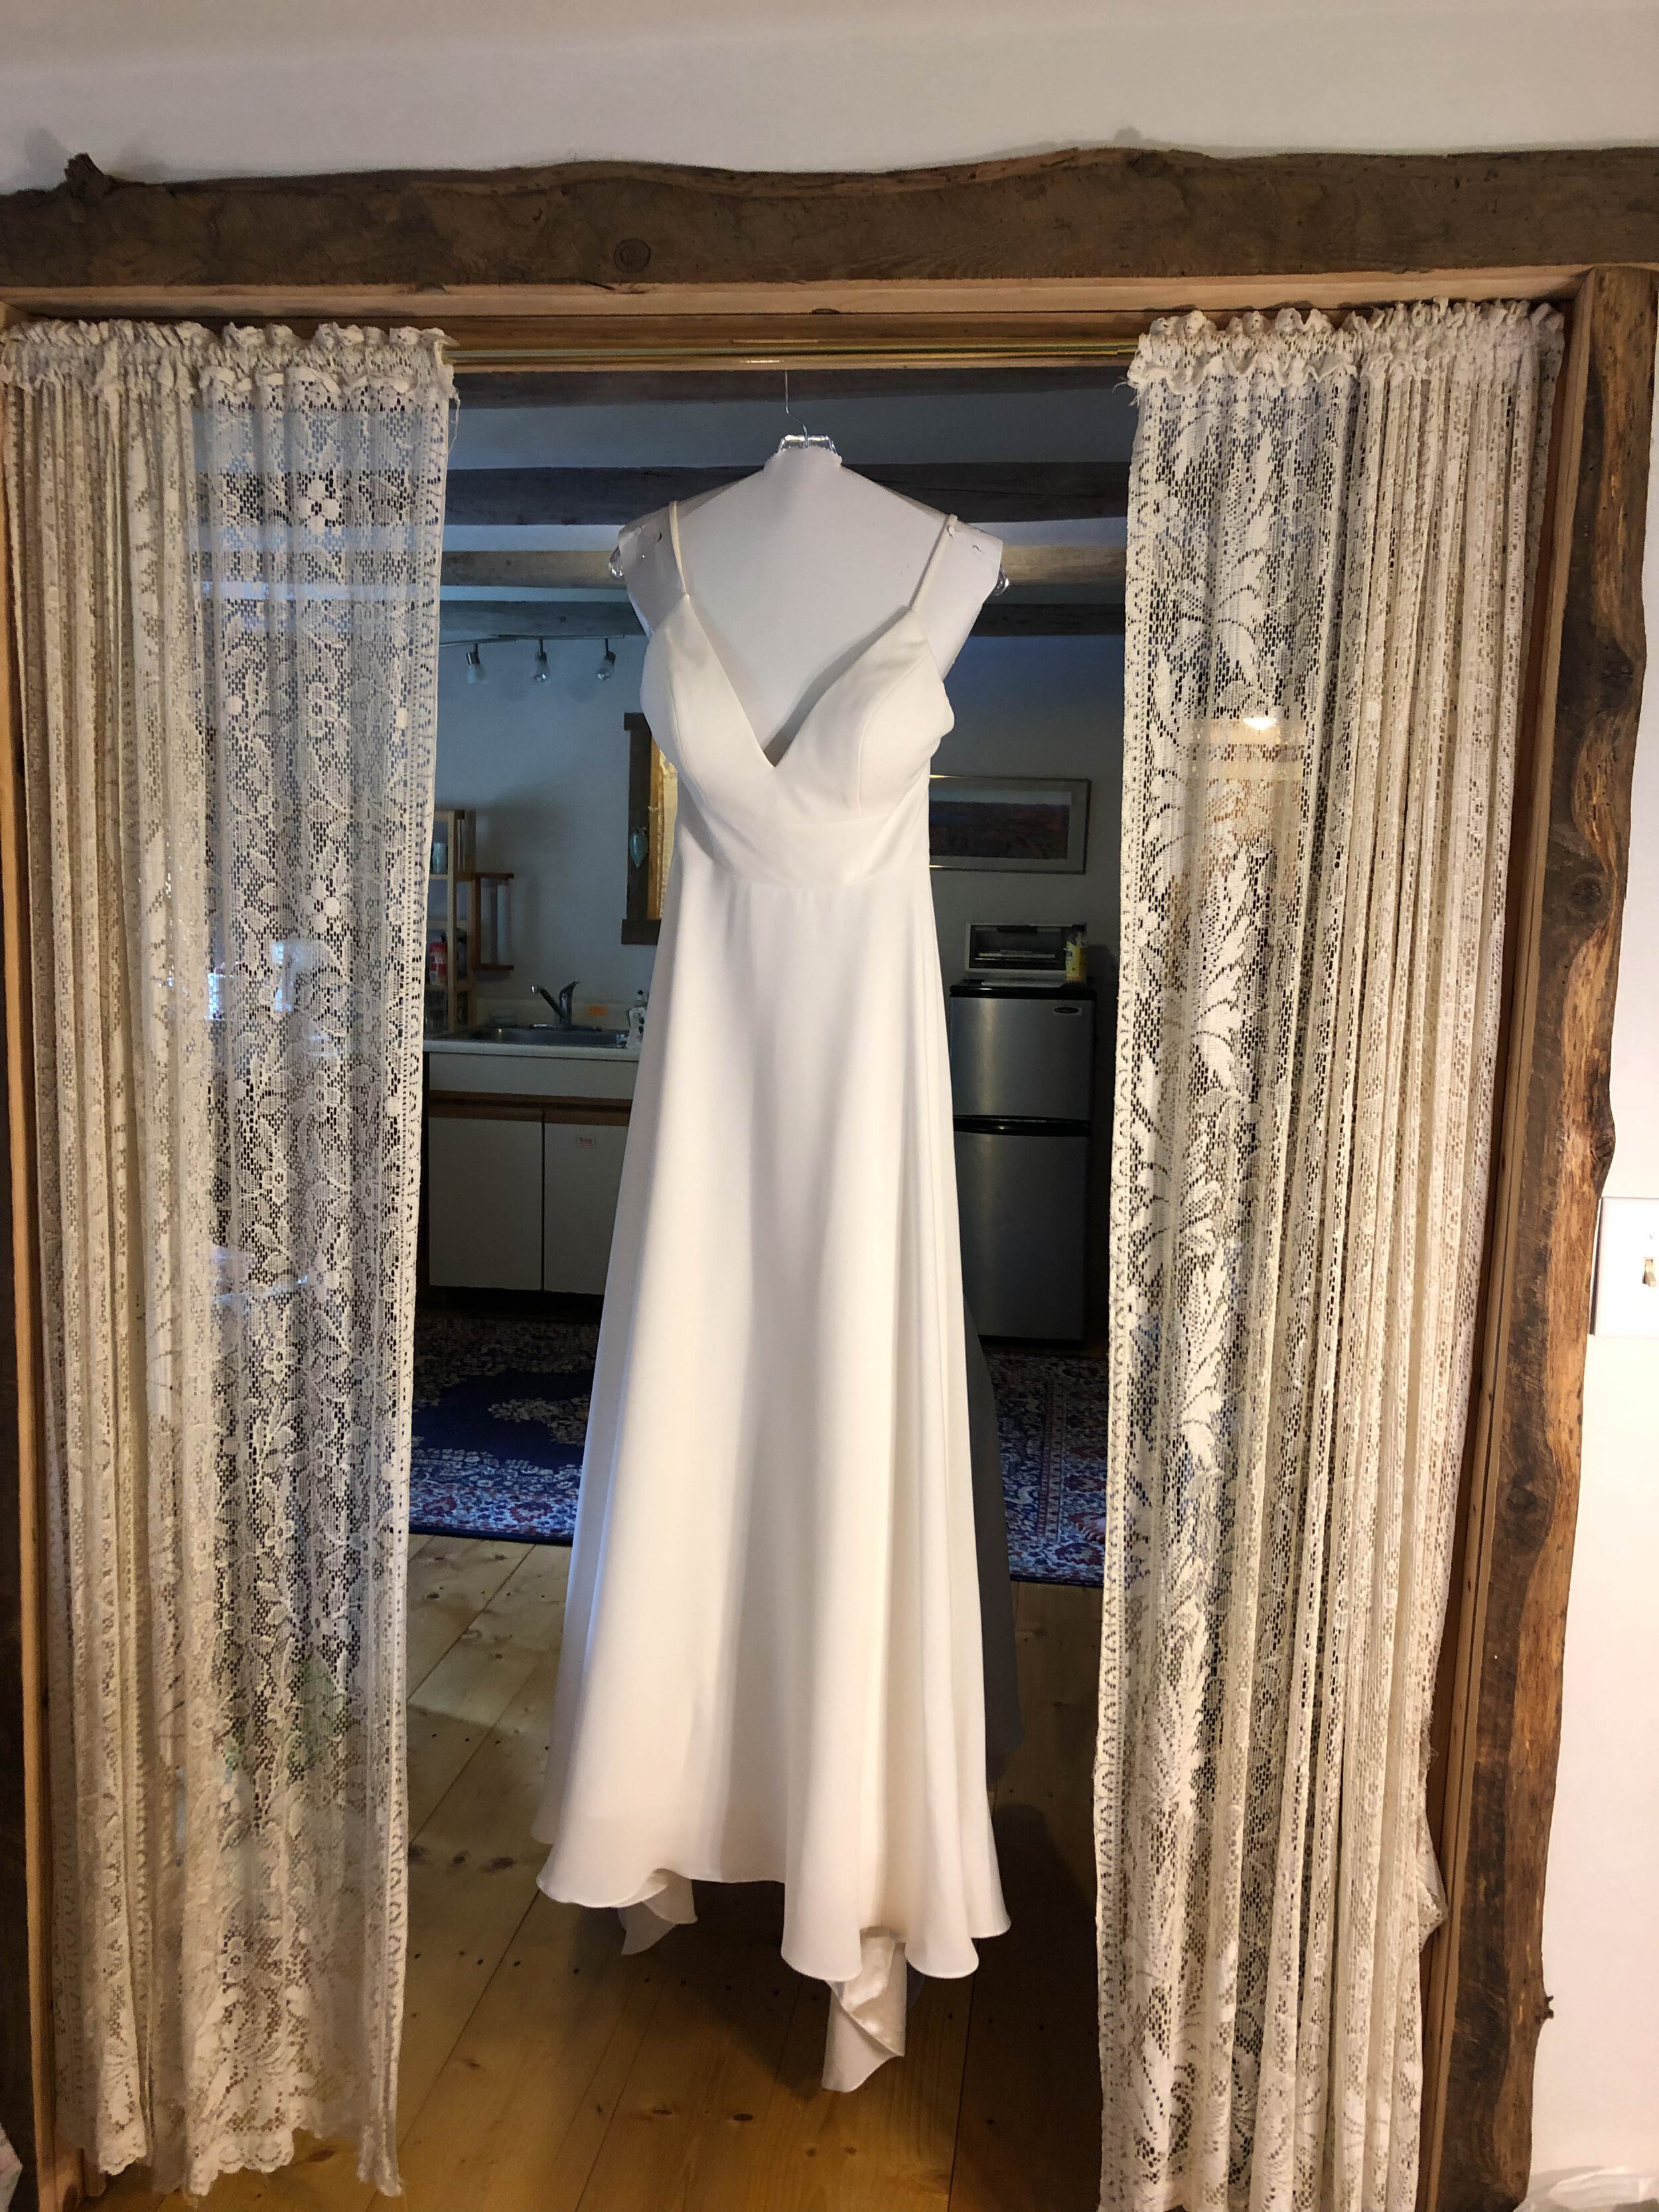 A wedding dress hanging on a curtain rod in a guest room in the barn